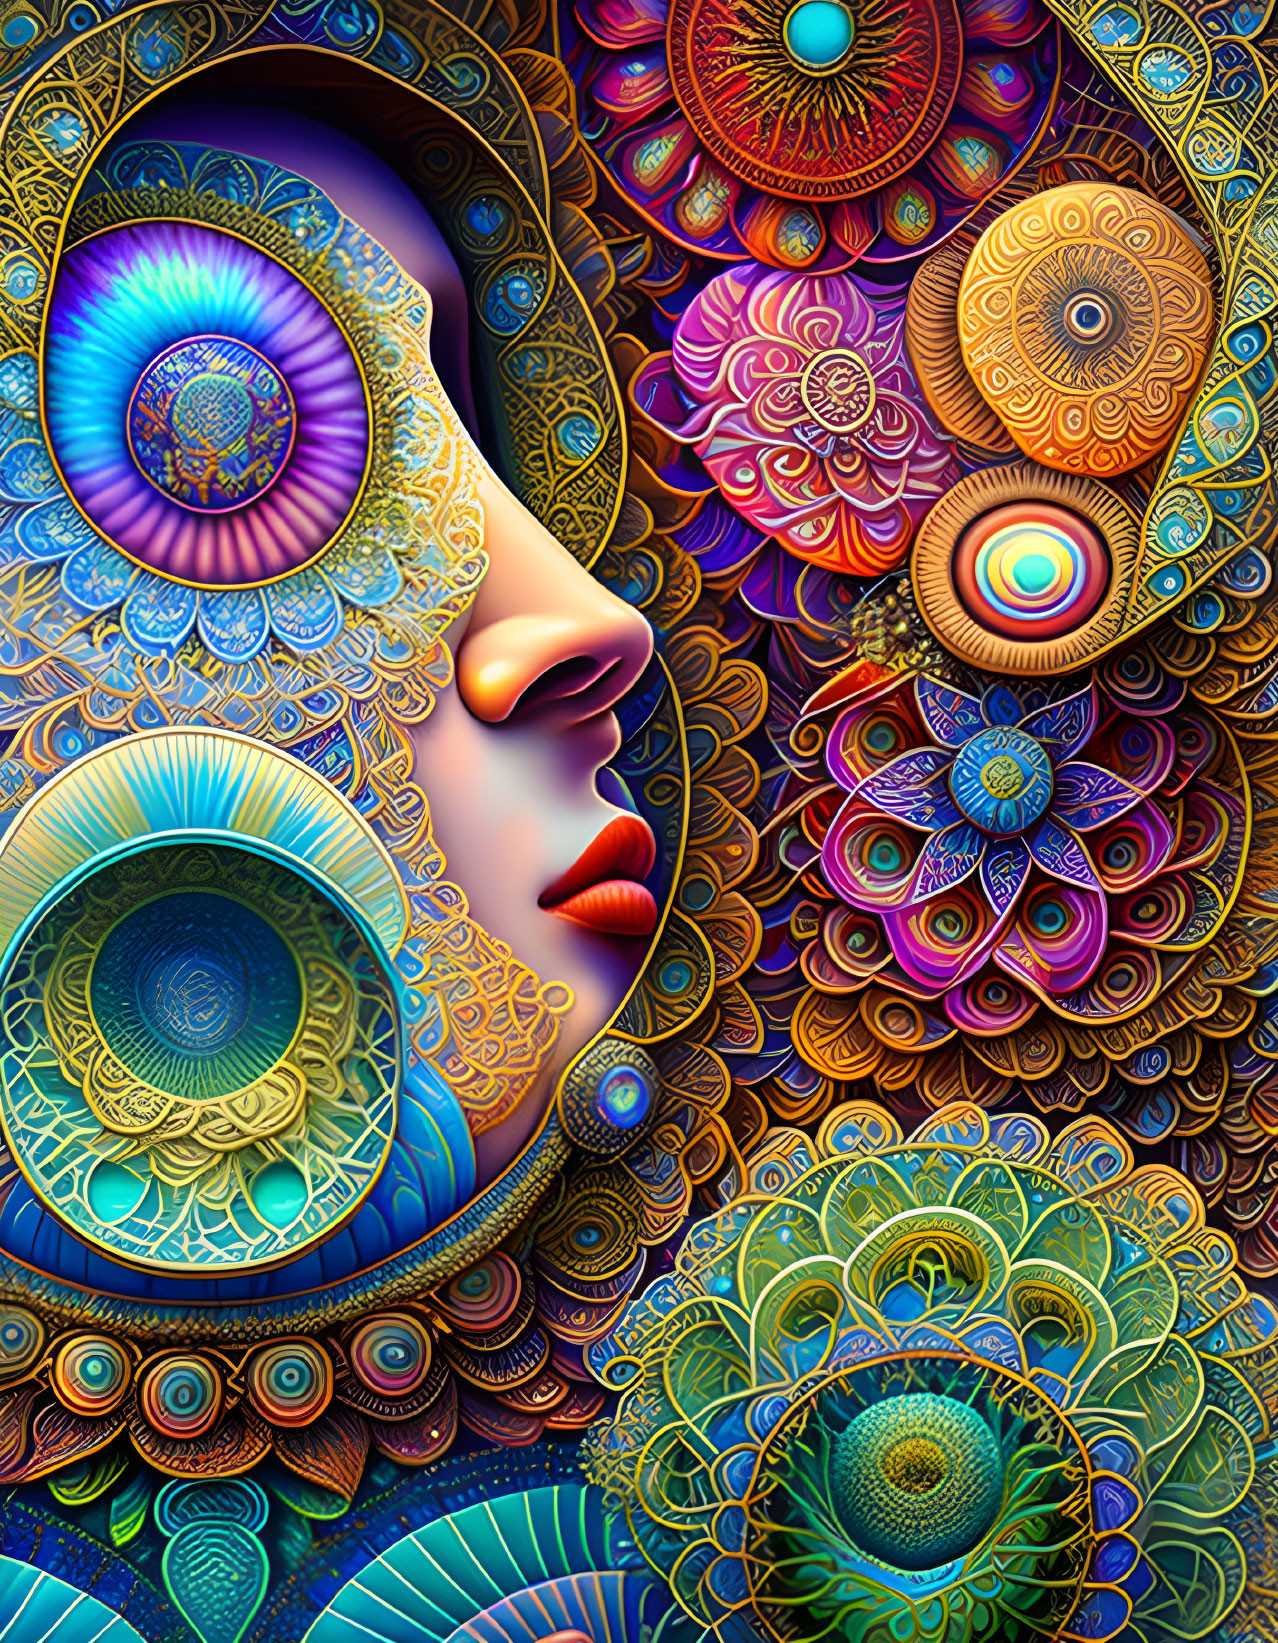 Colorful digital art: stylized face with intricate patterns